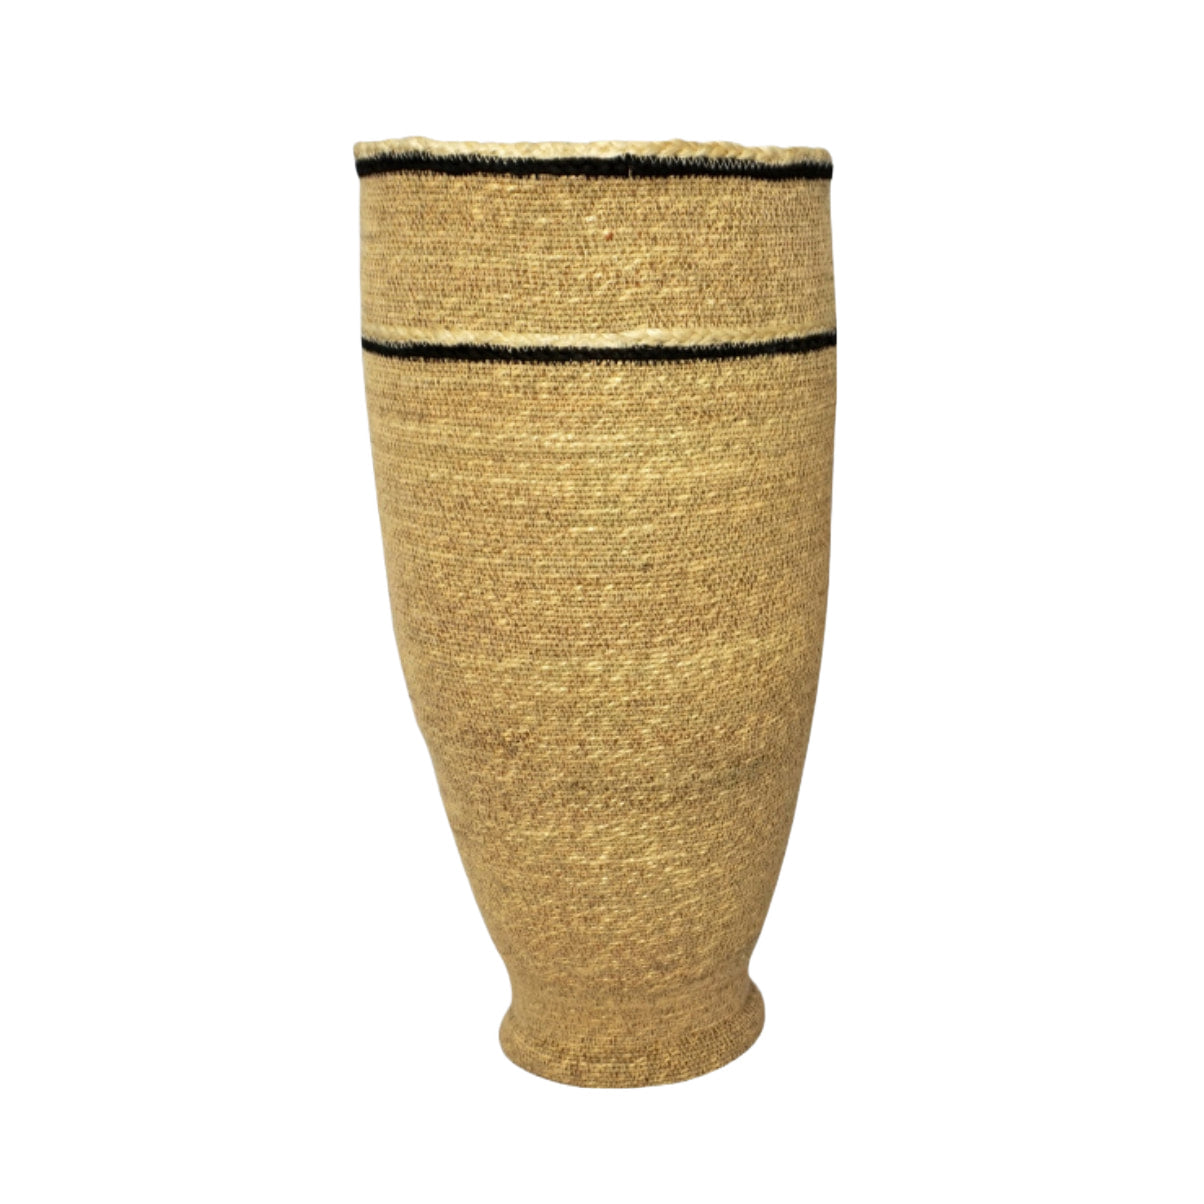 Seagrass Vase - Large